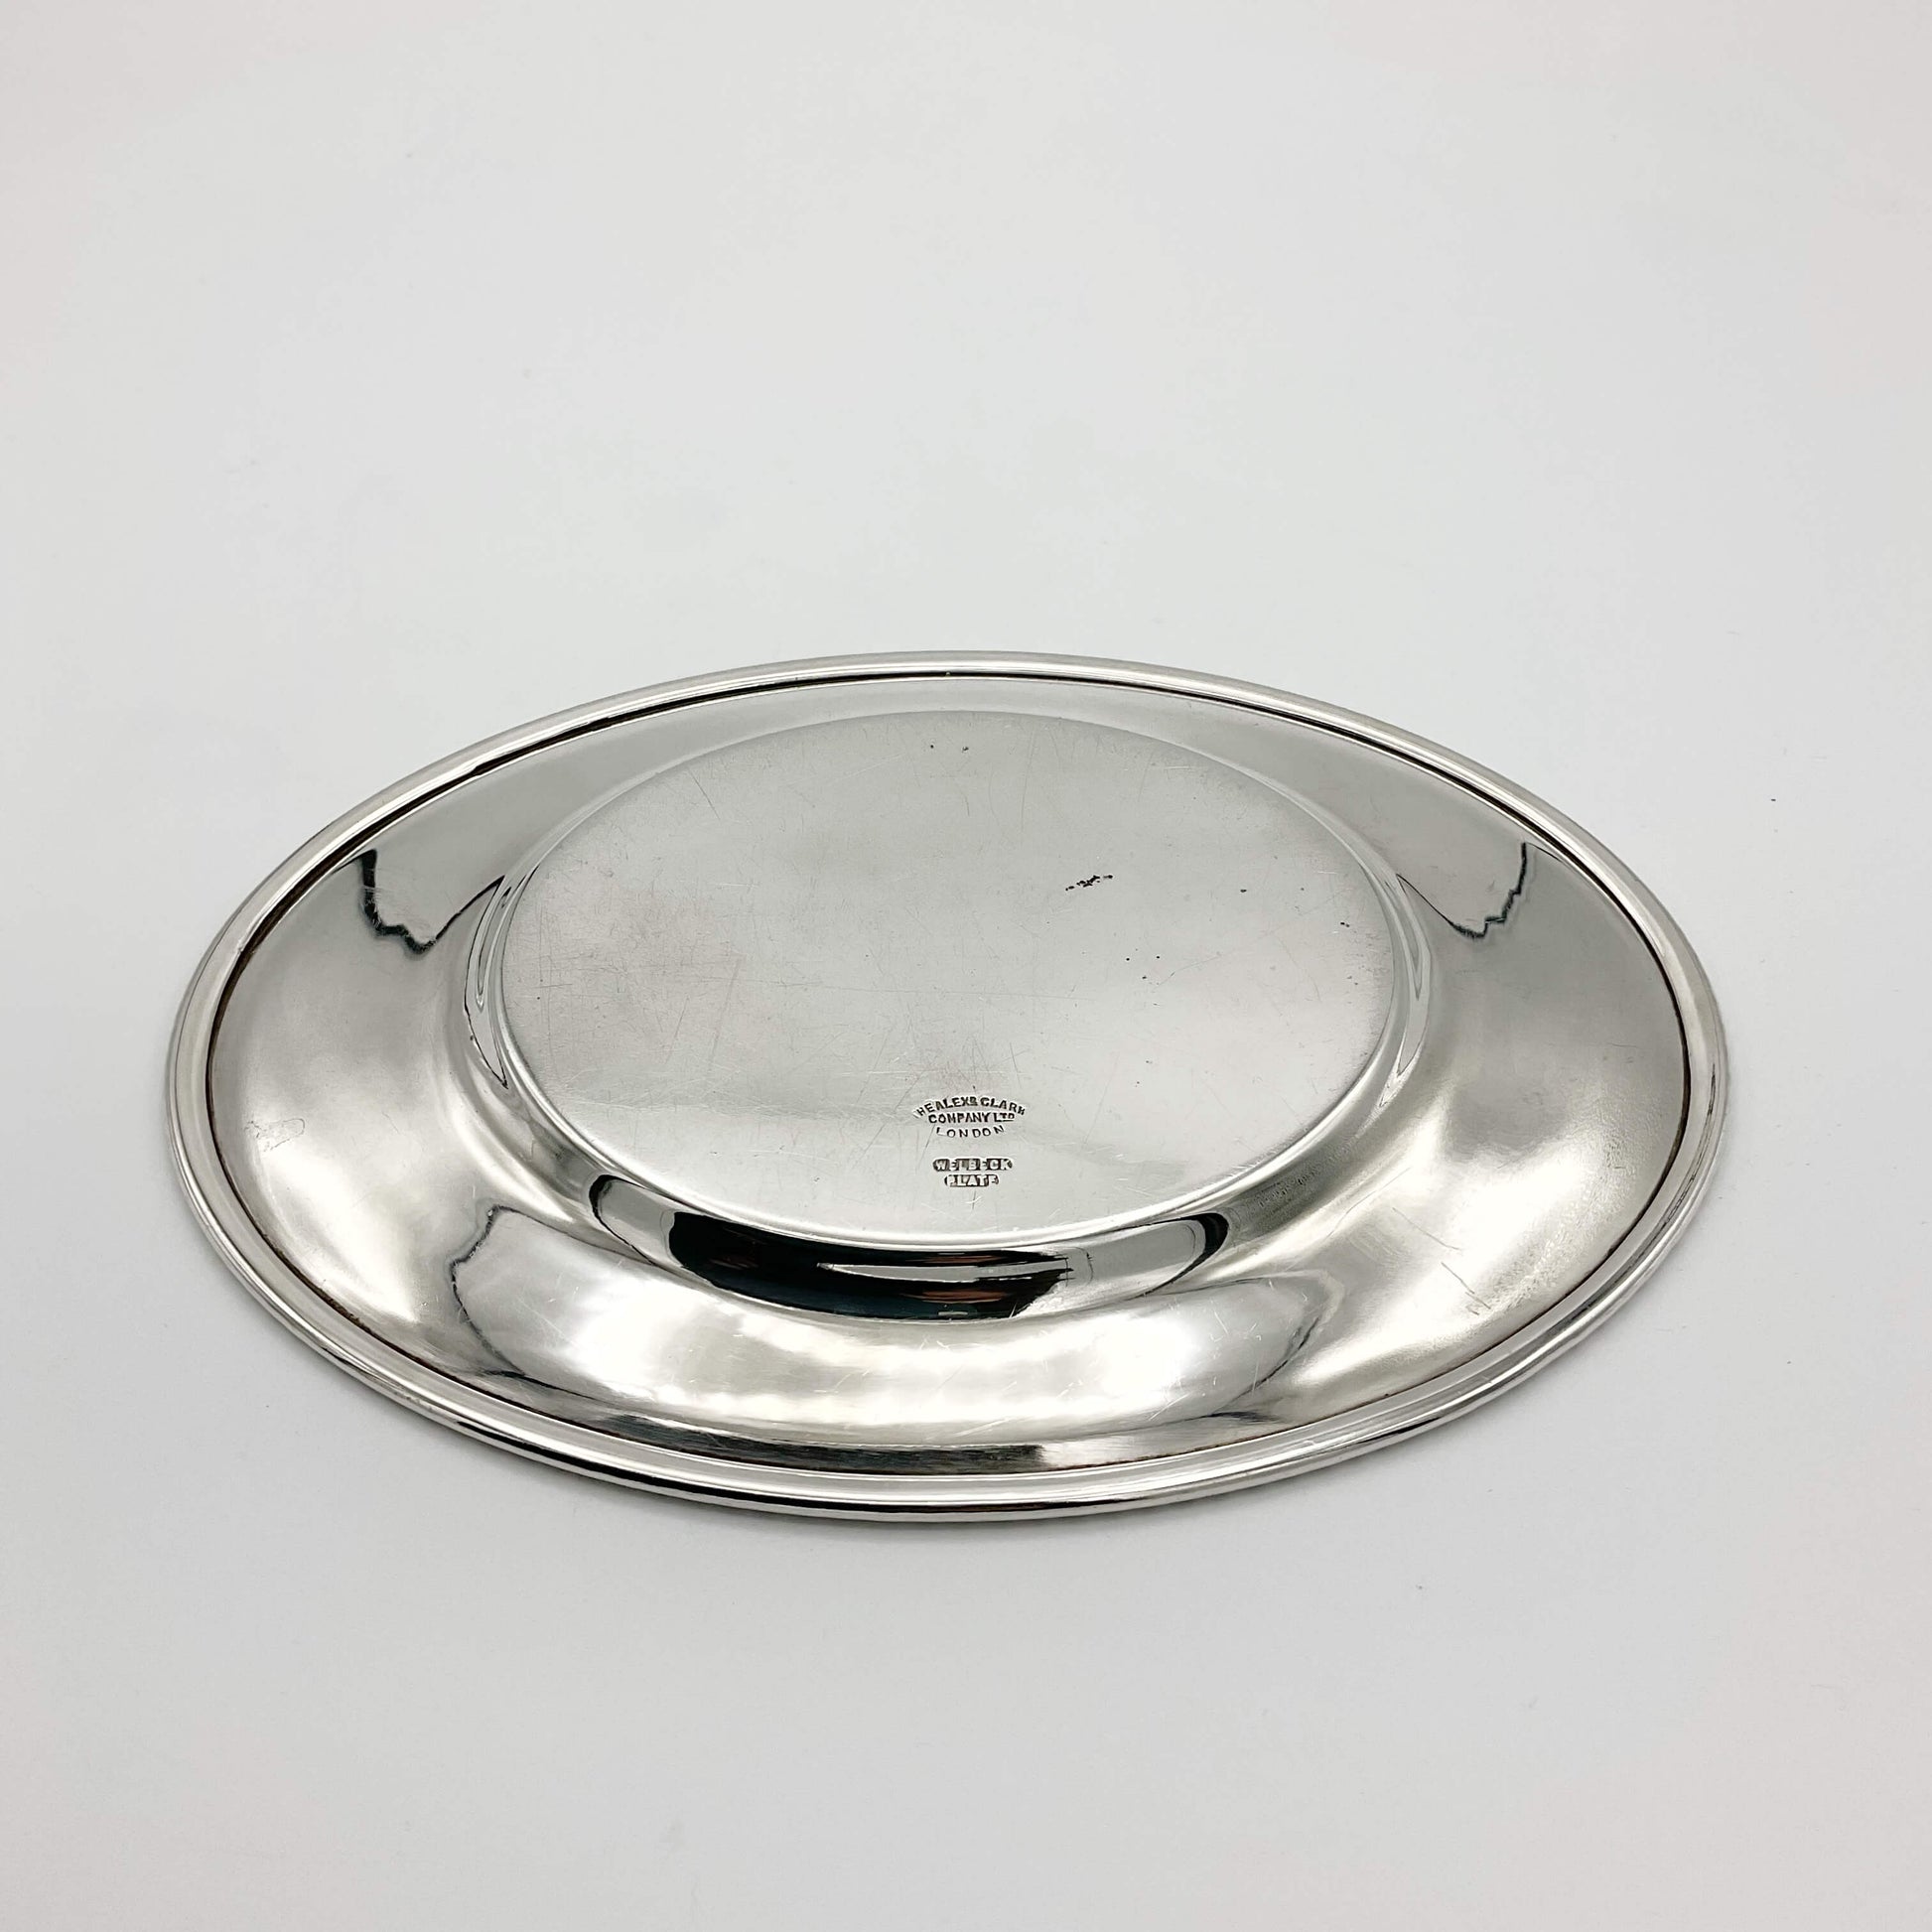 The base of the Vintage Silver Plated tray